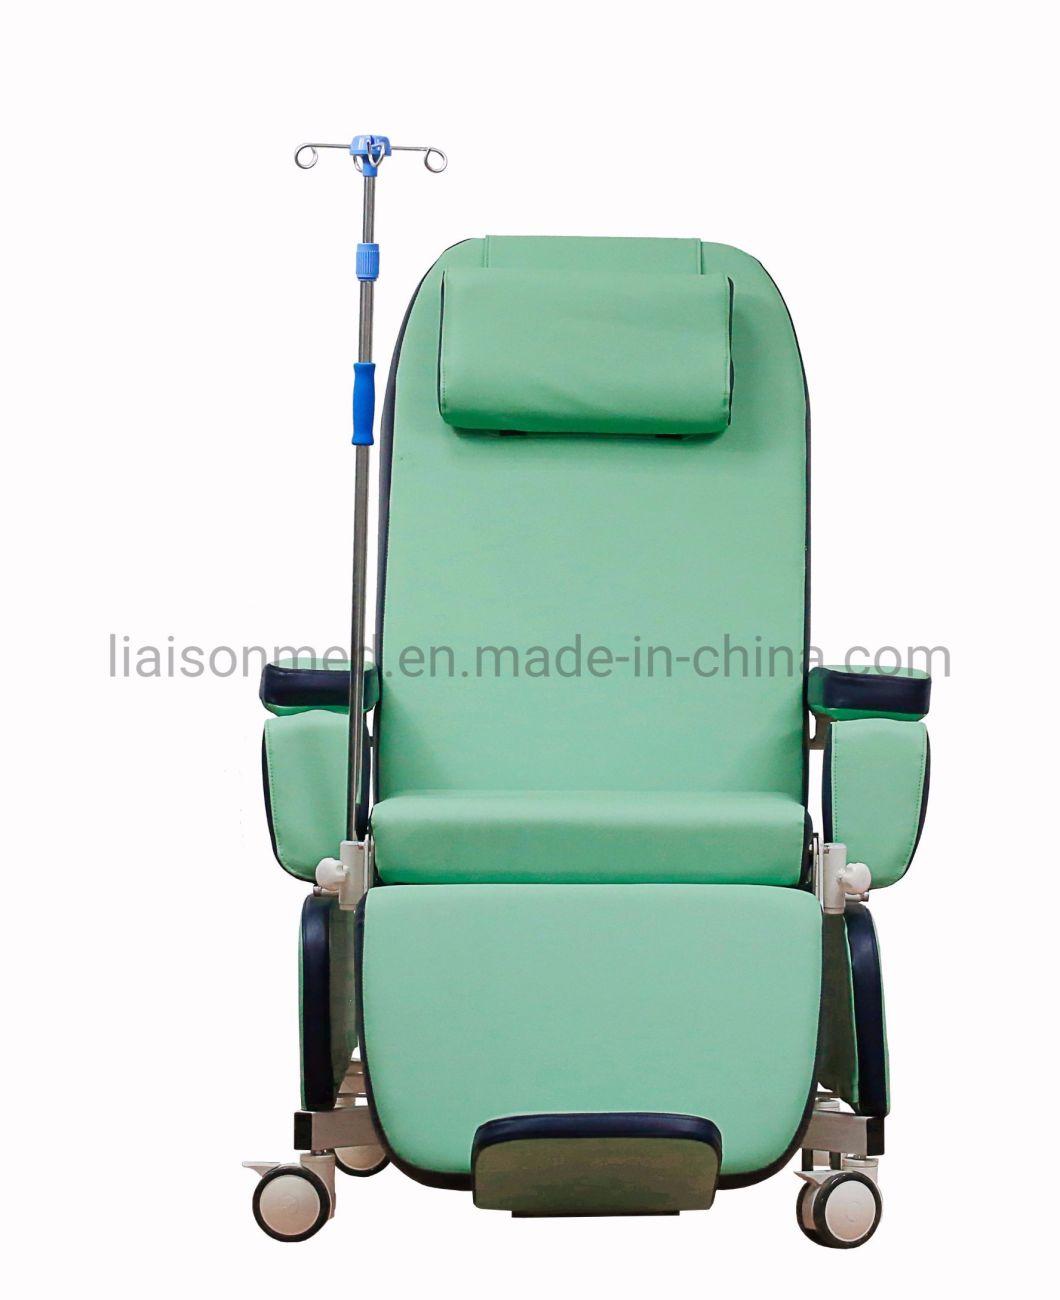 Mn-Bdc002 Hospital Chair Blood Donation Chair Electric Dialysis Chair